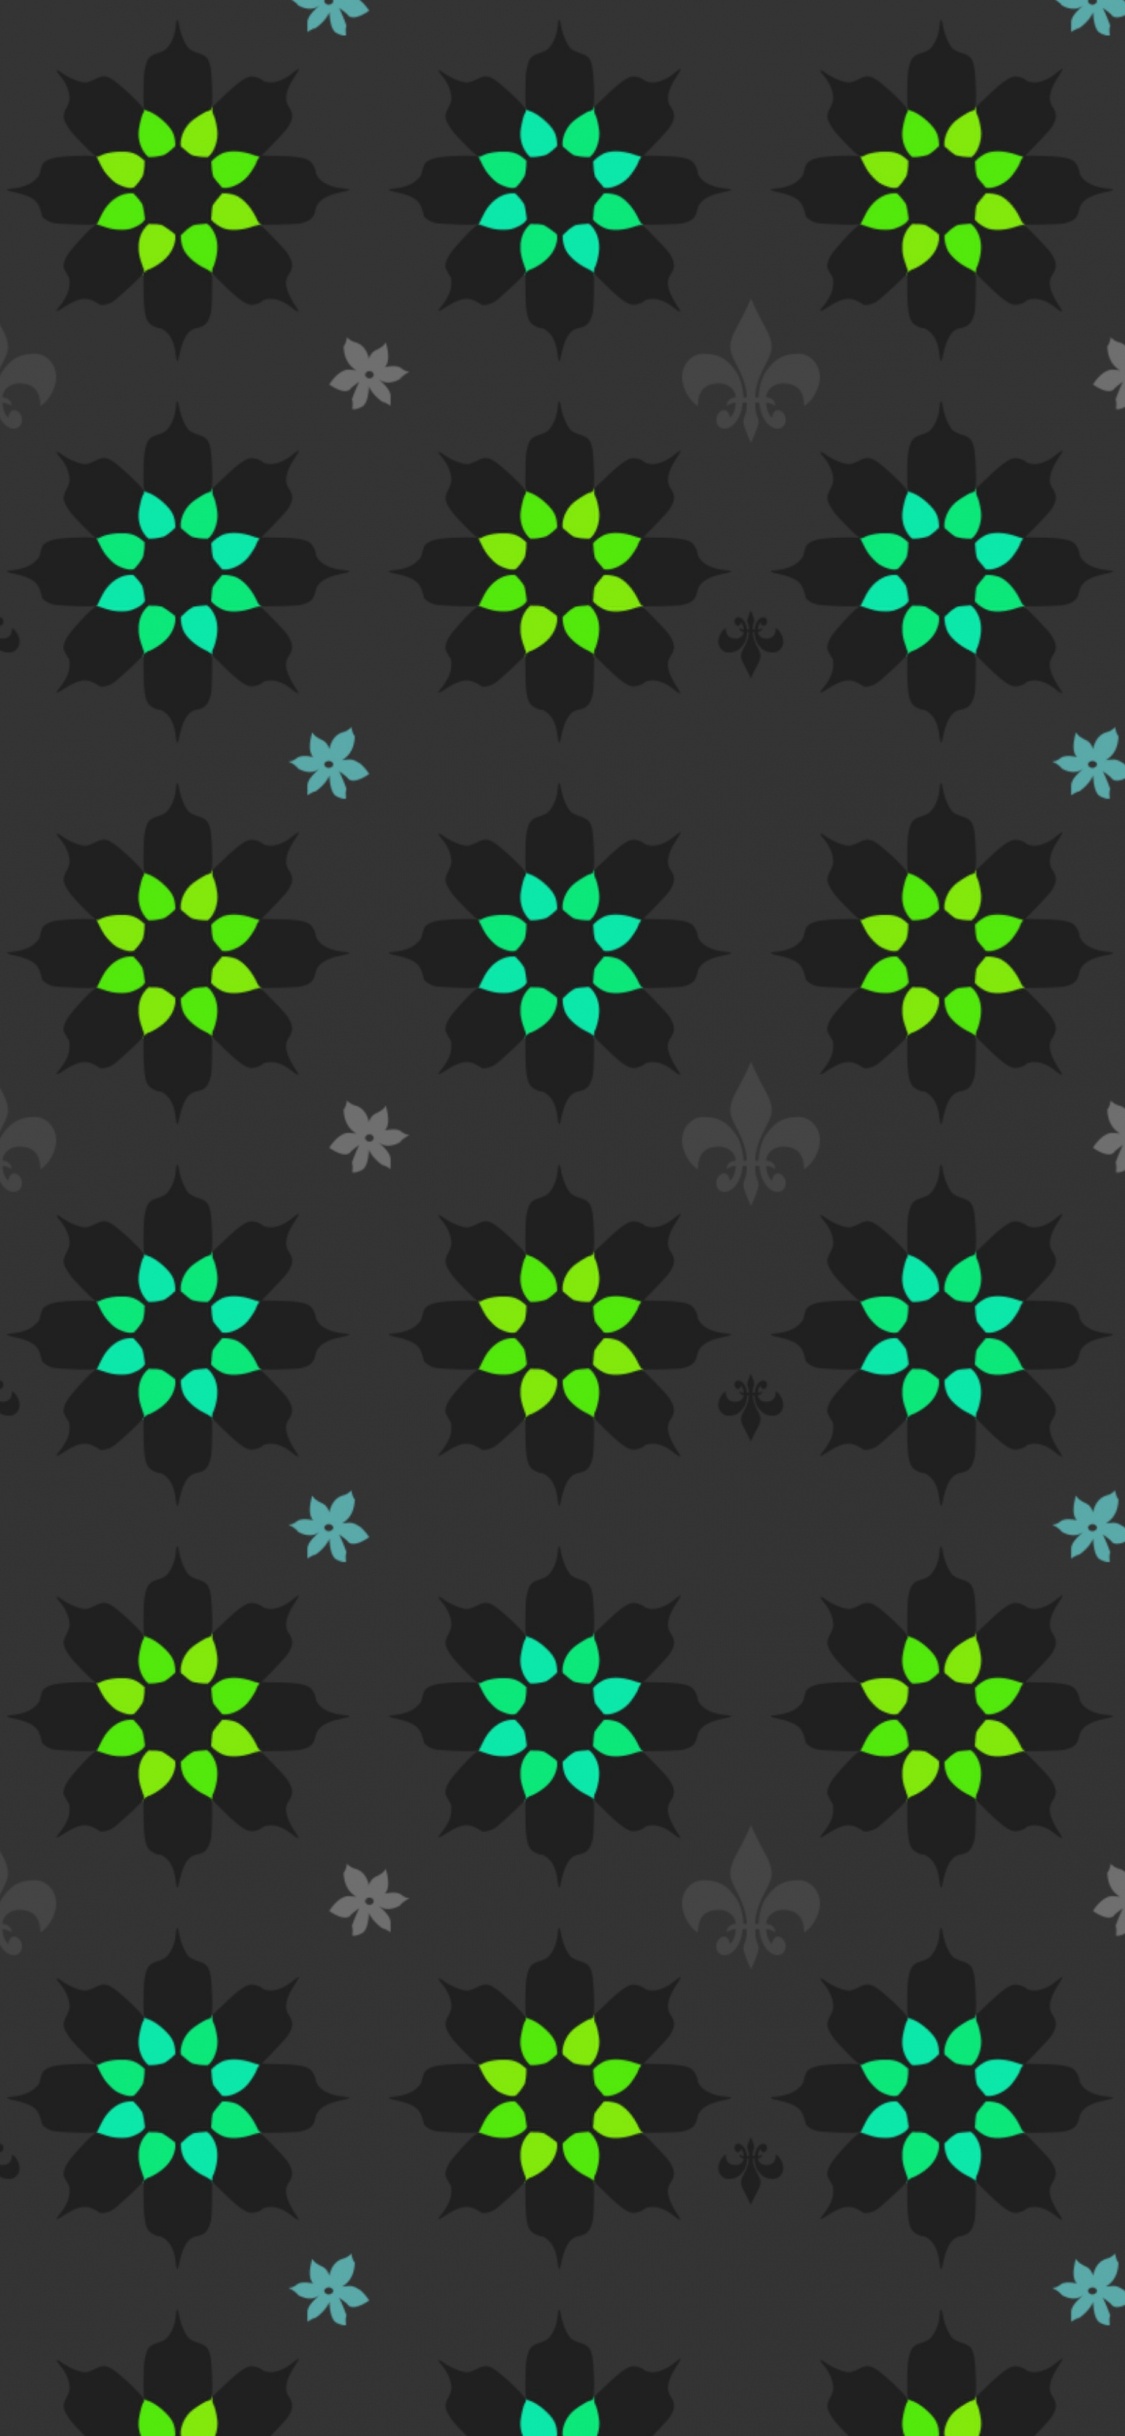 Black and White Star Print Textile. Wallpaper in 1125x2436 Resolution